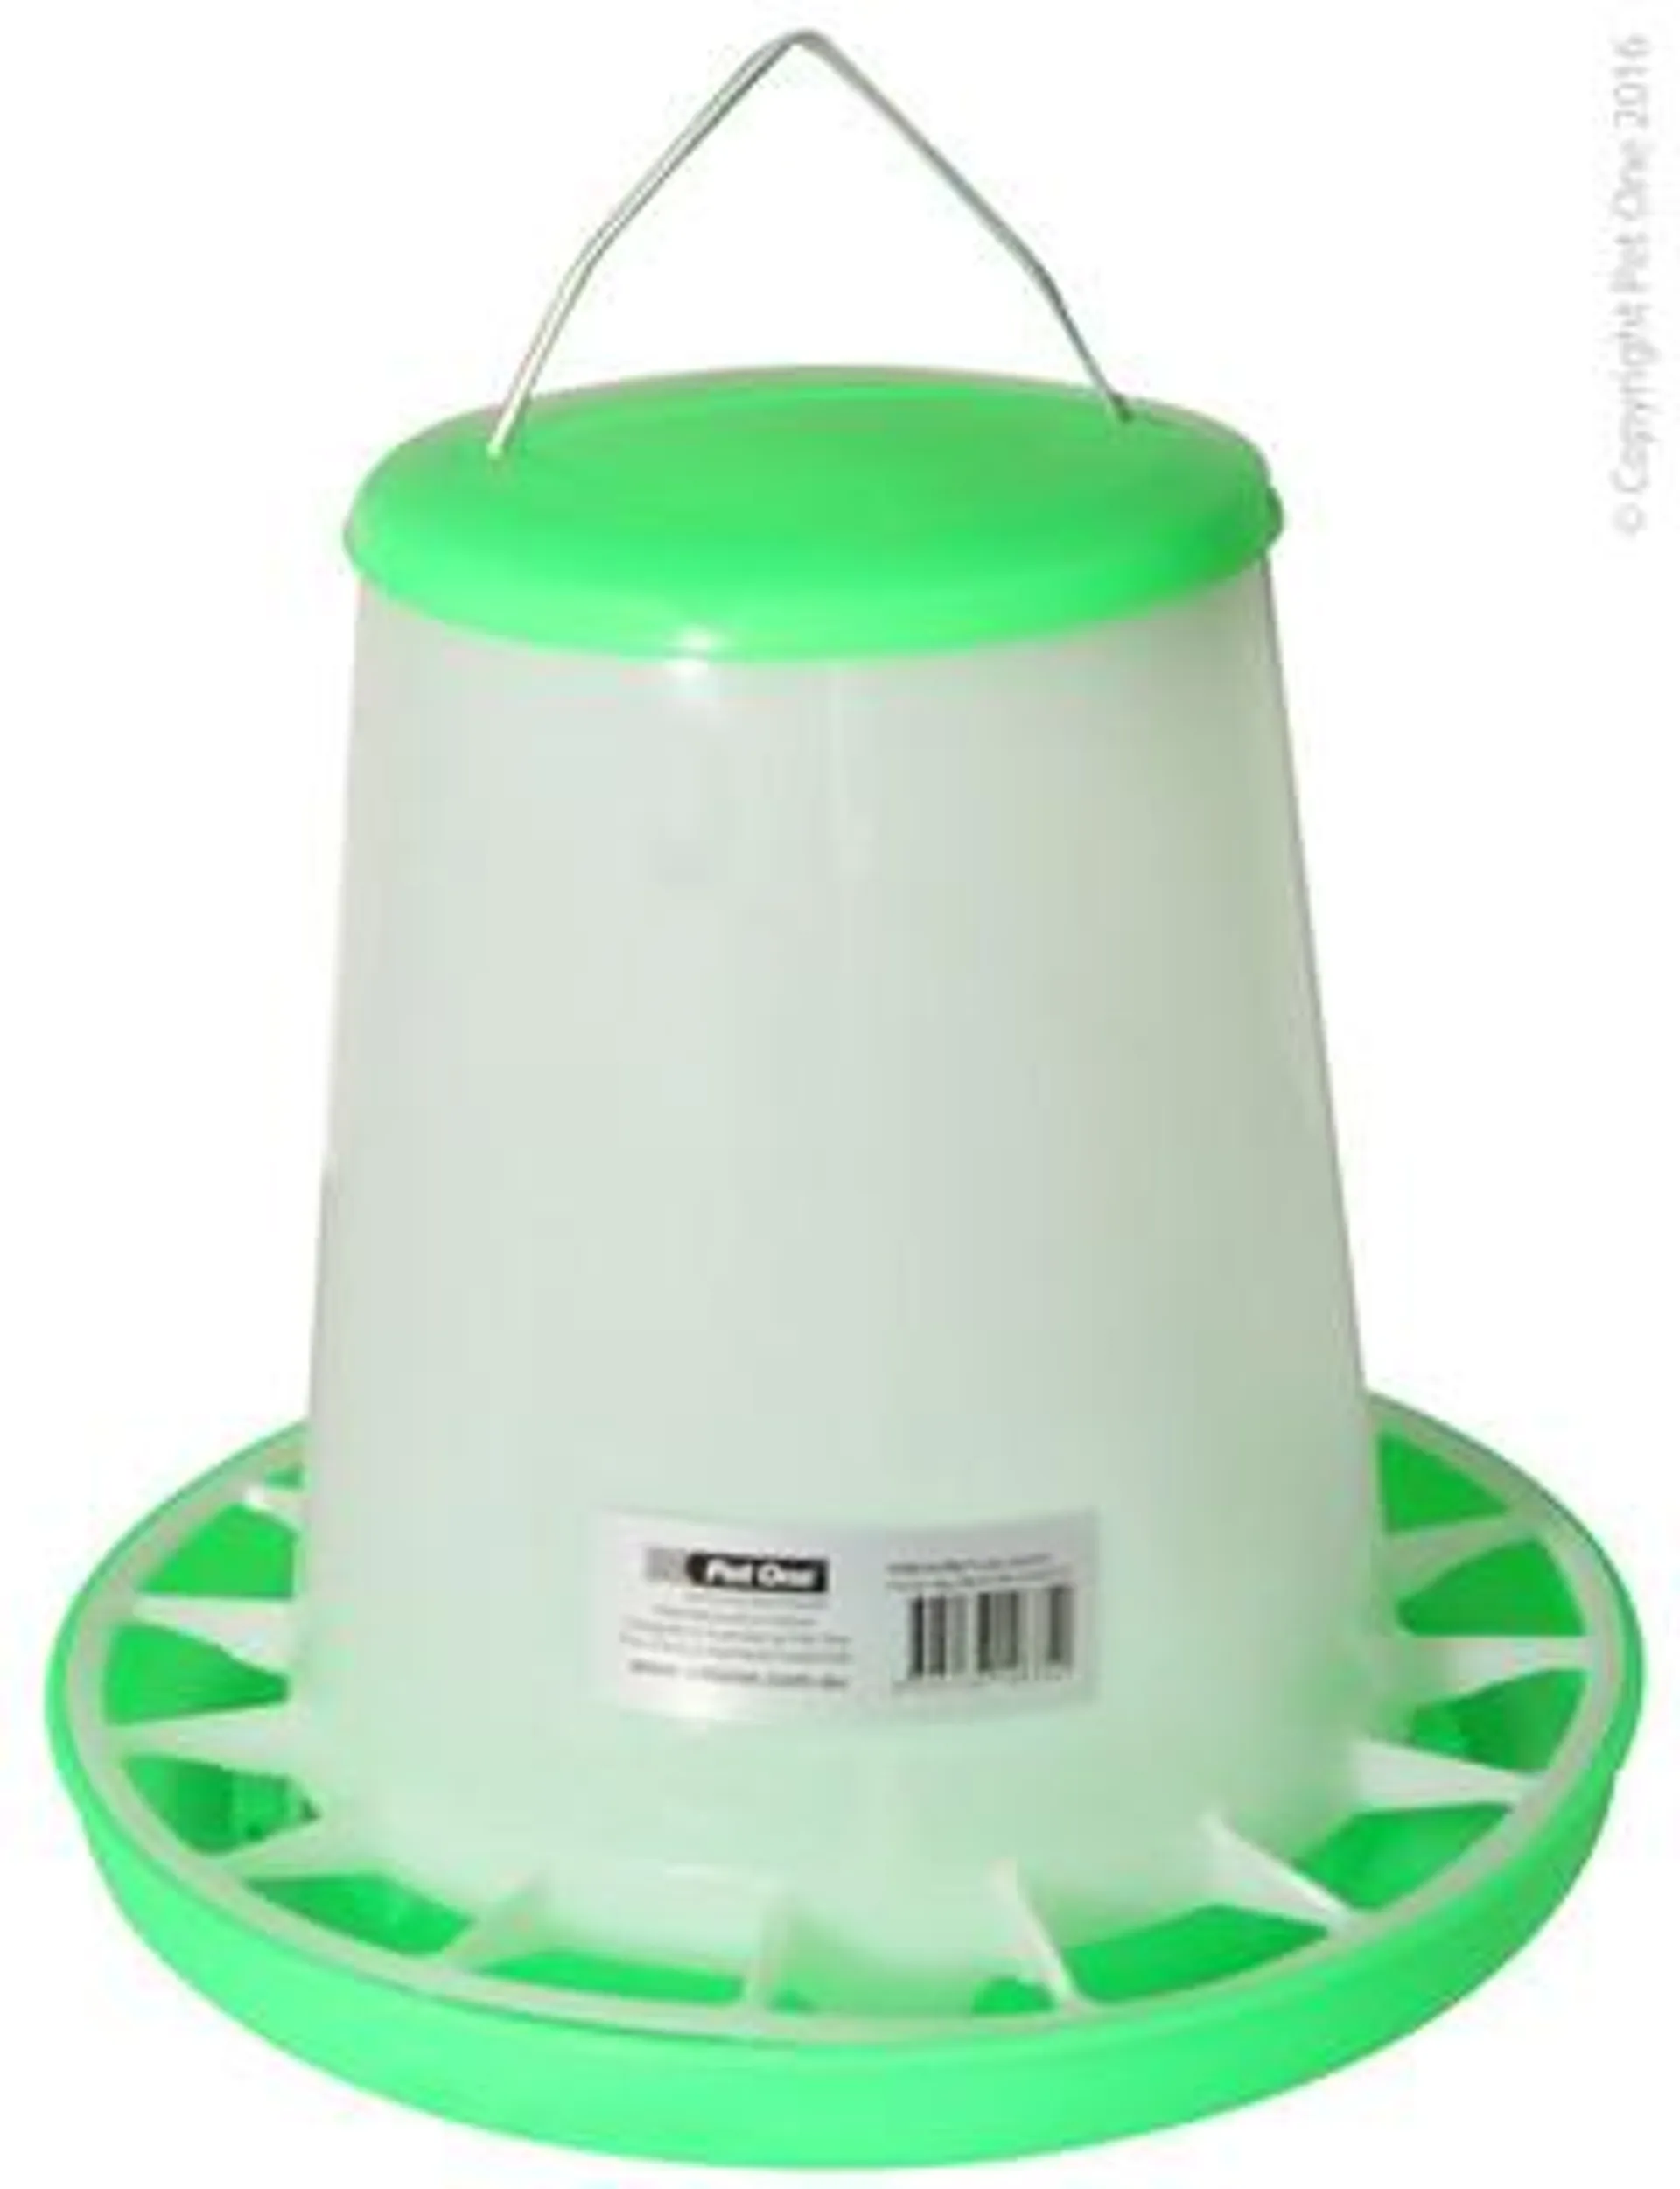 Pet One Poultry Gravity Feeder